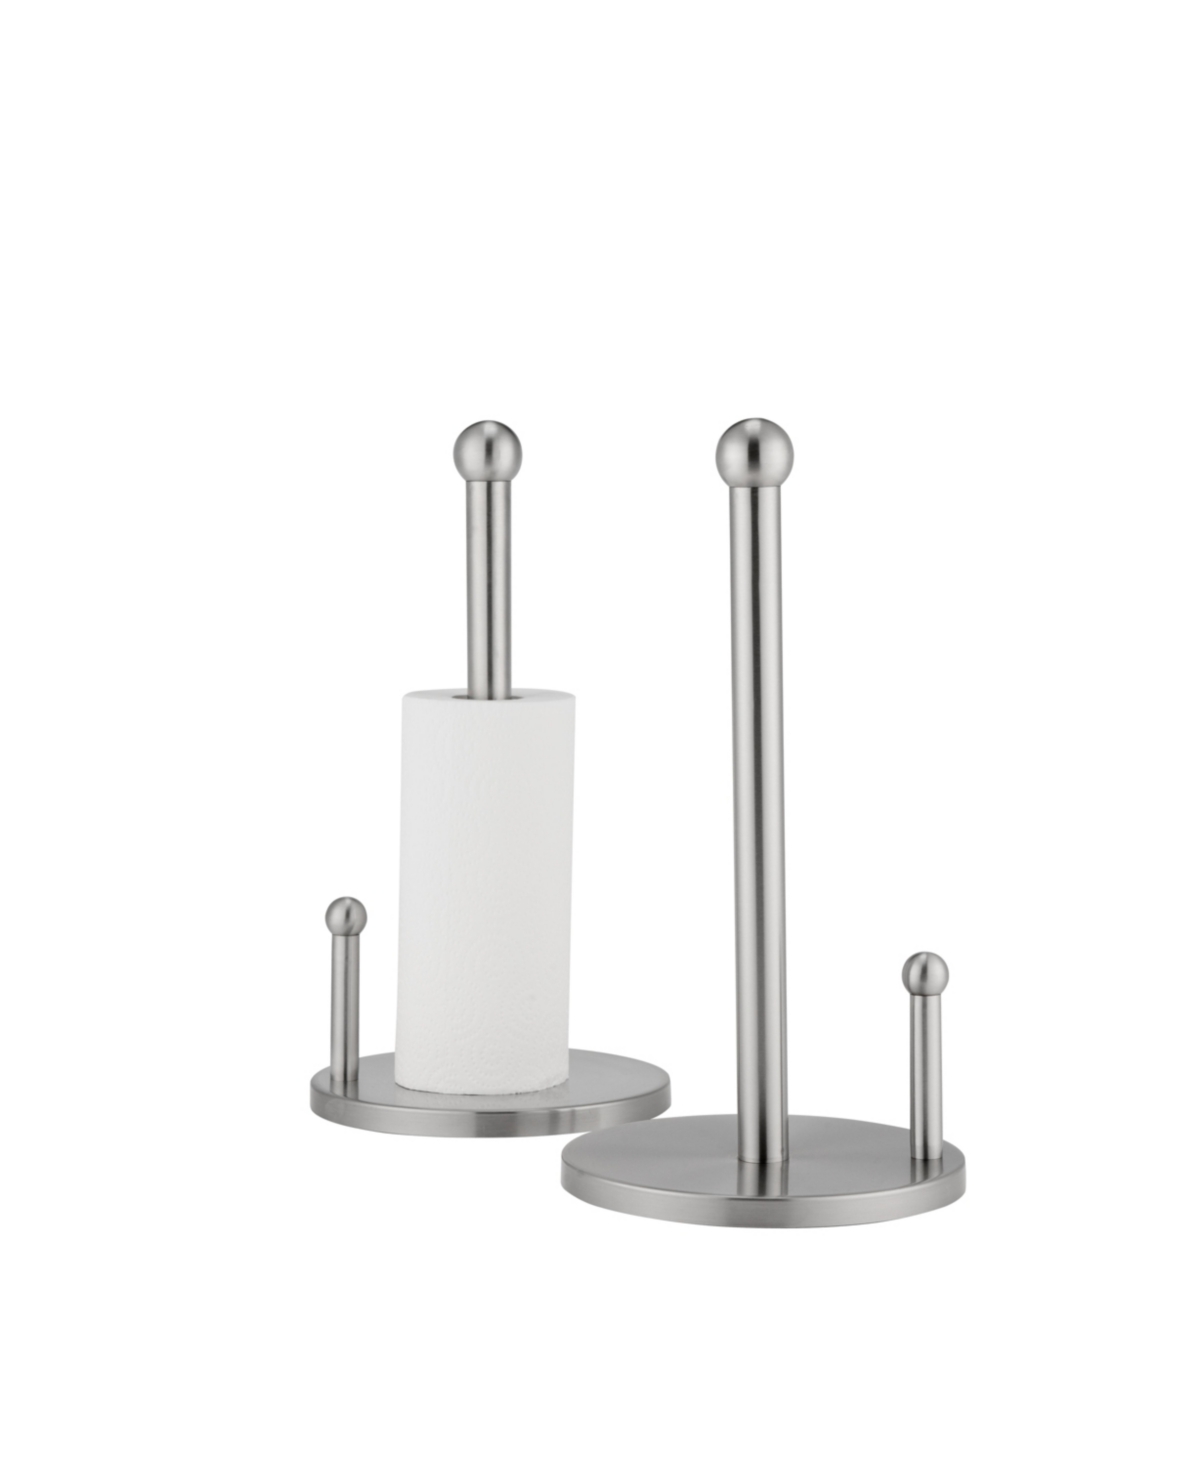 Set of 2 Stainless Steel Paper Towel Holders - Silver